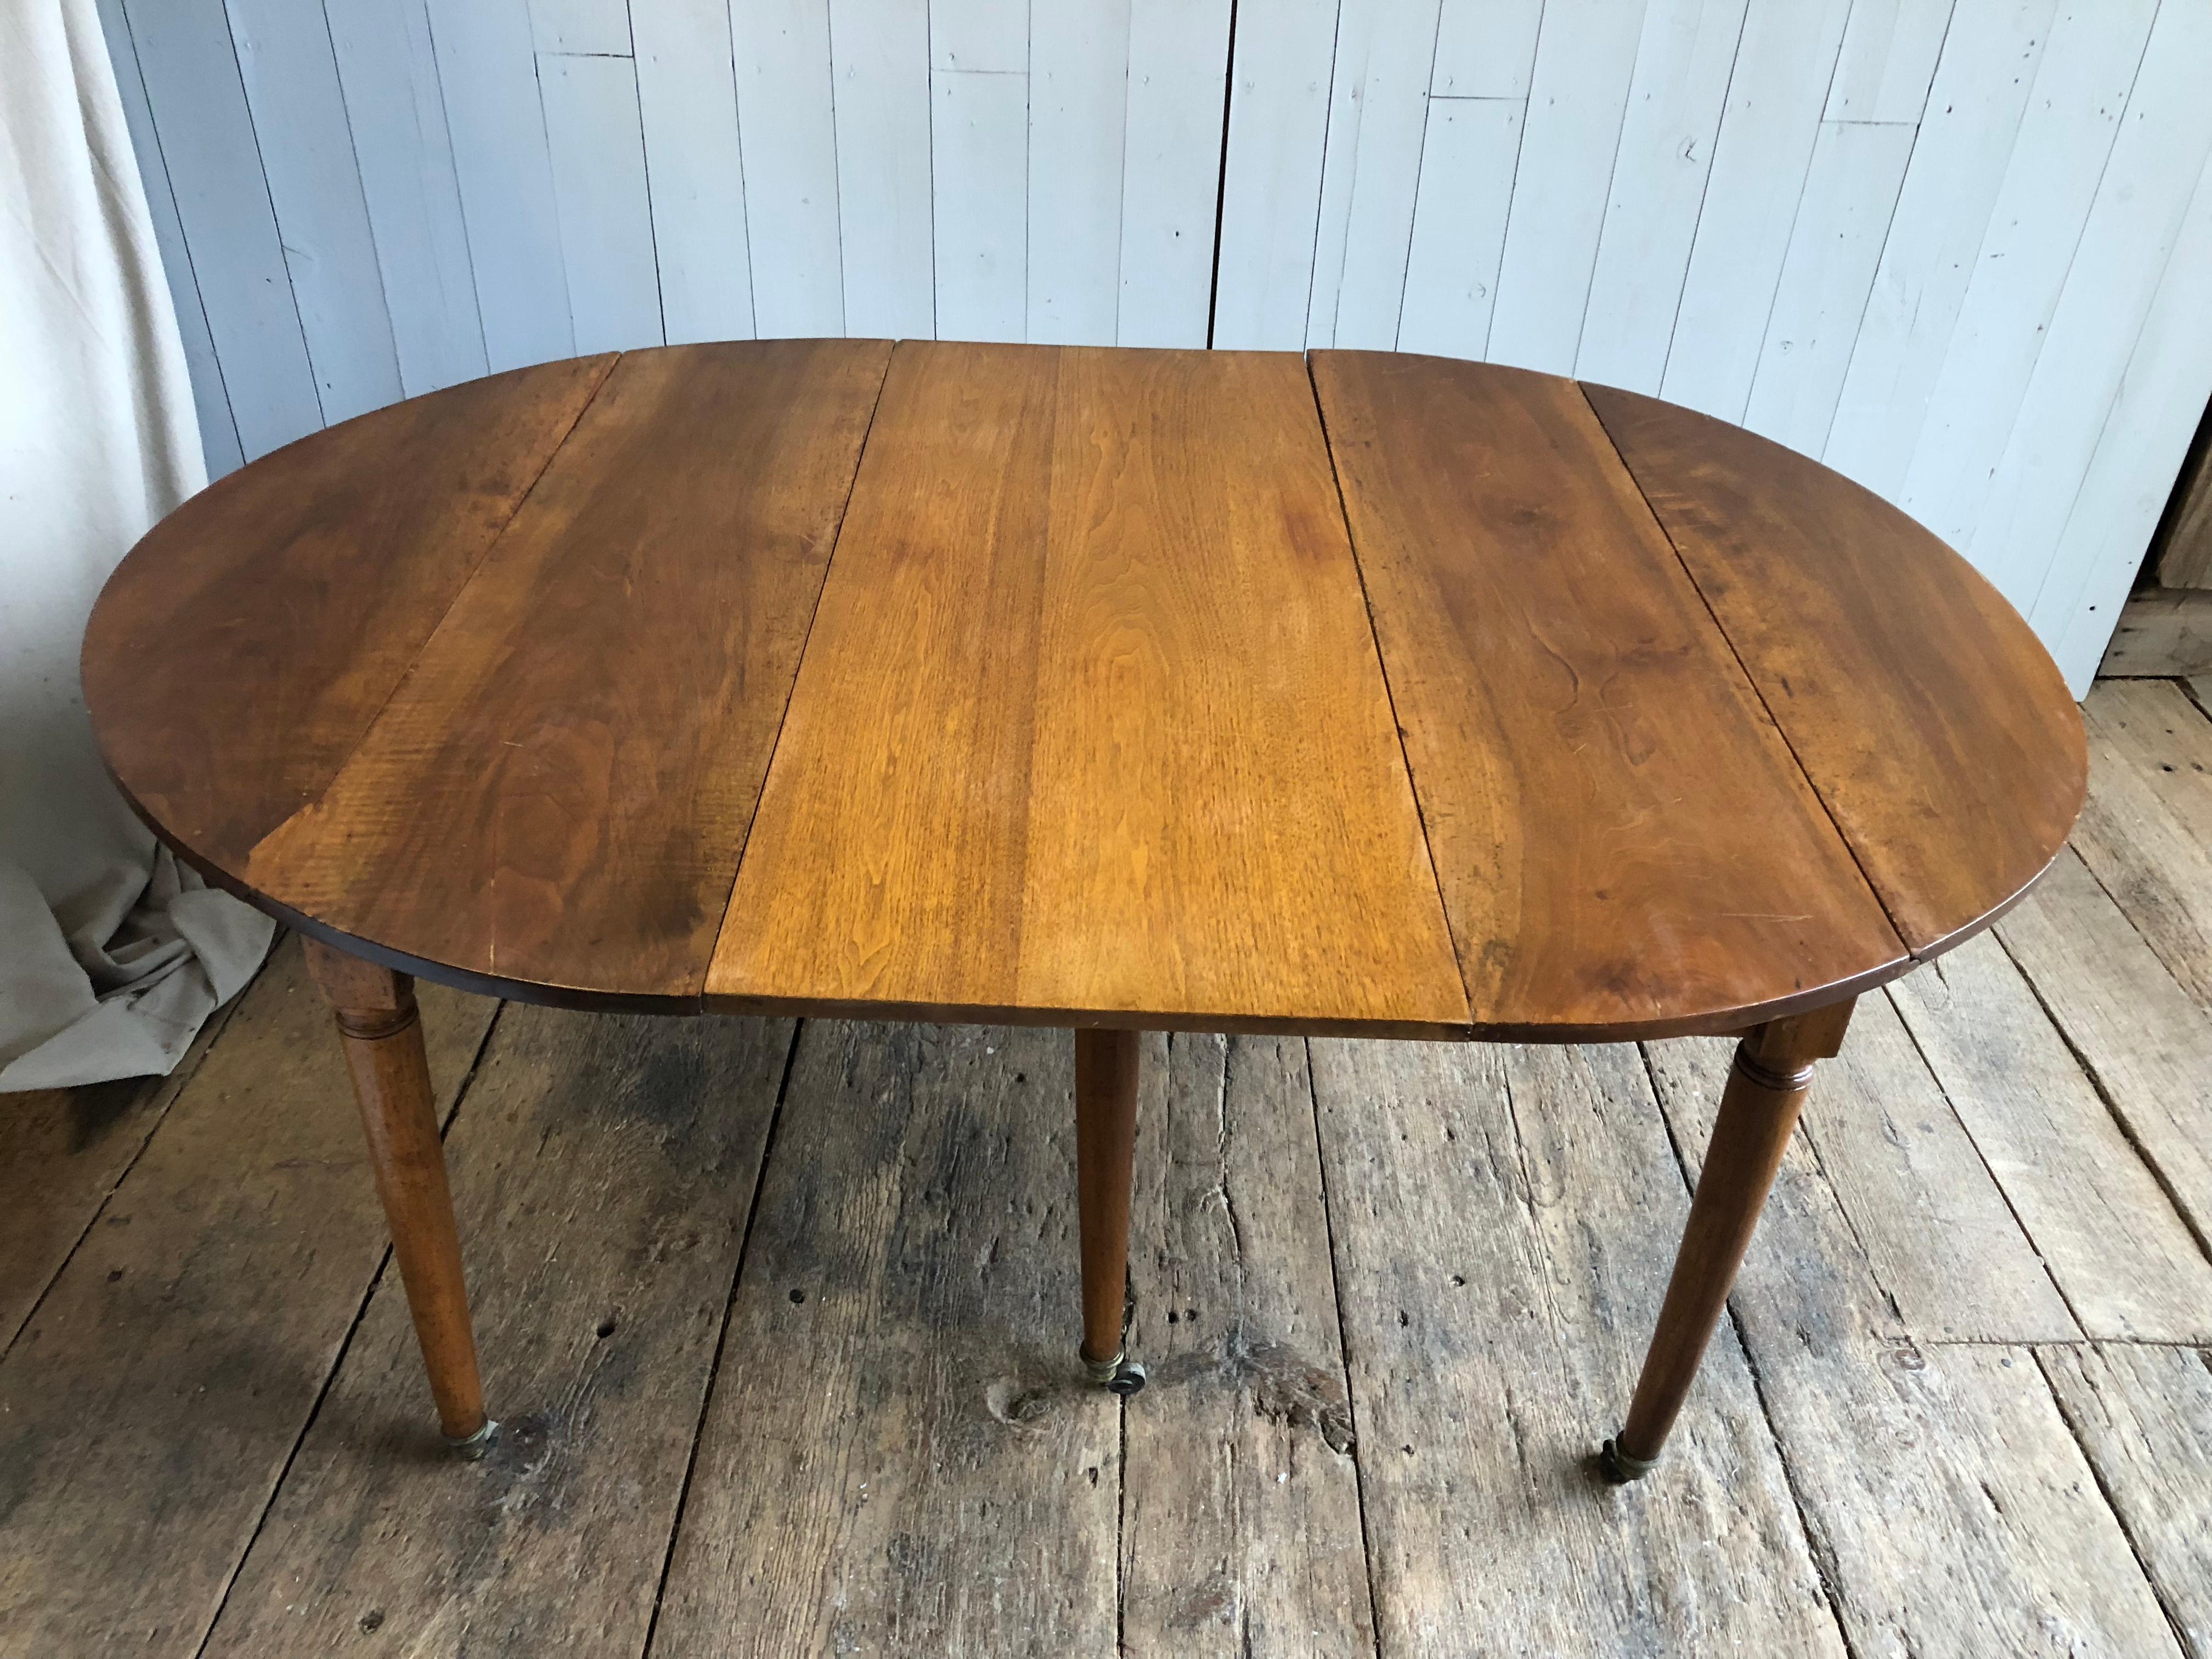 French Directoire Period Drop Leaf Dining Table, circa 1800